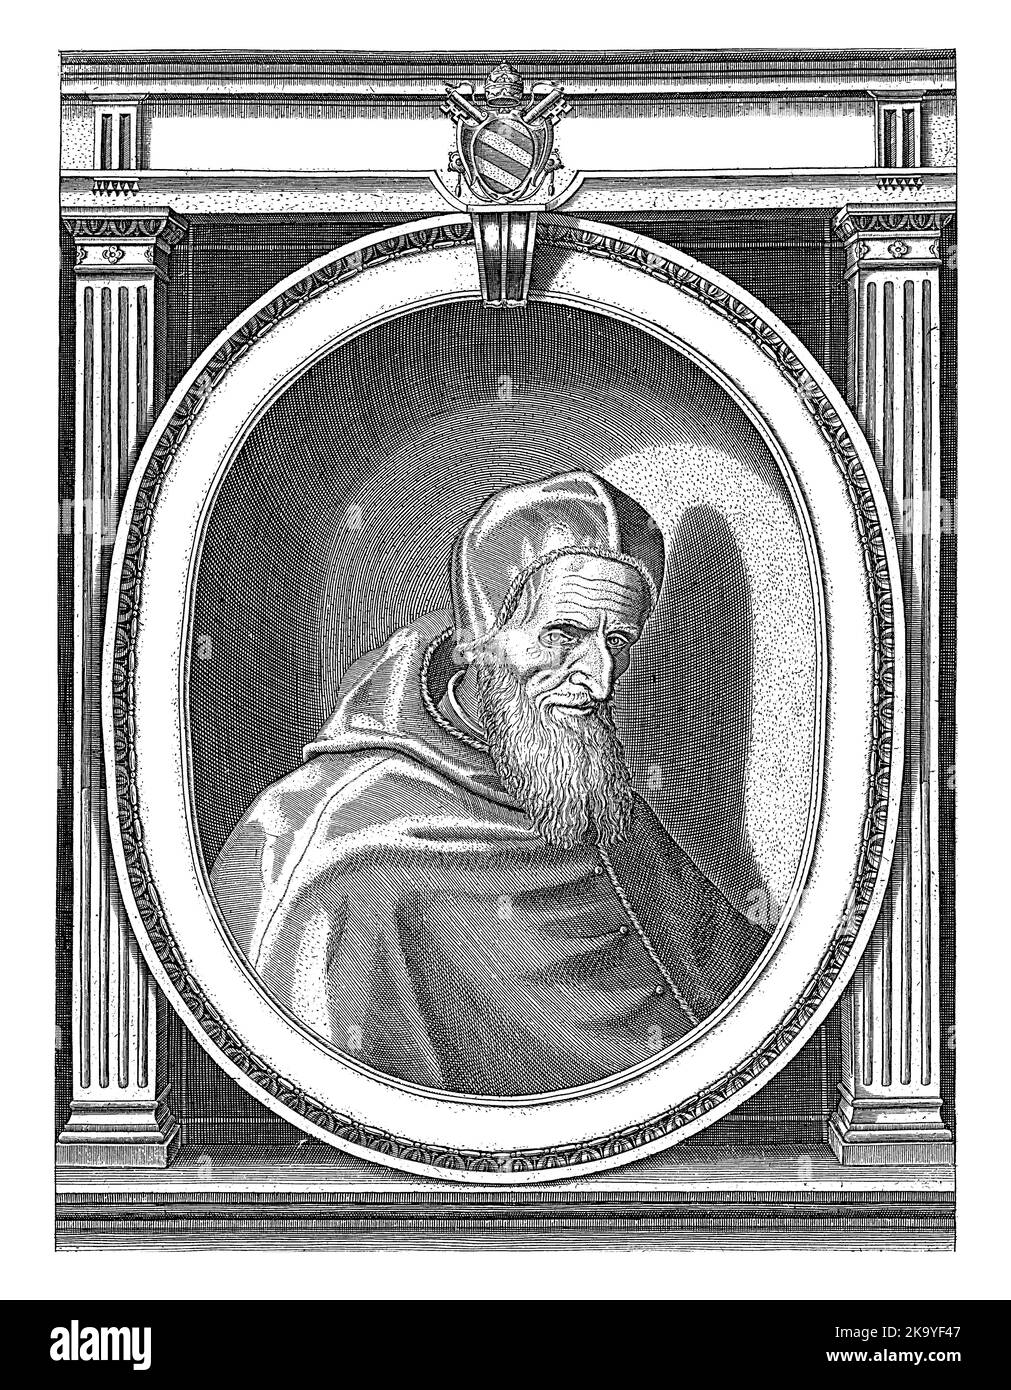 Portrait of Pope Pius V dressed in the papal robes, head adorned with a camauro. Bust to the right in an oval frame with edge lettering. Stock Photo